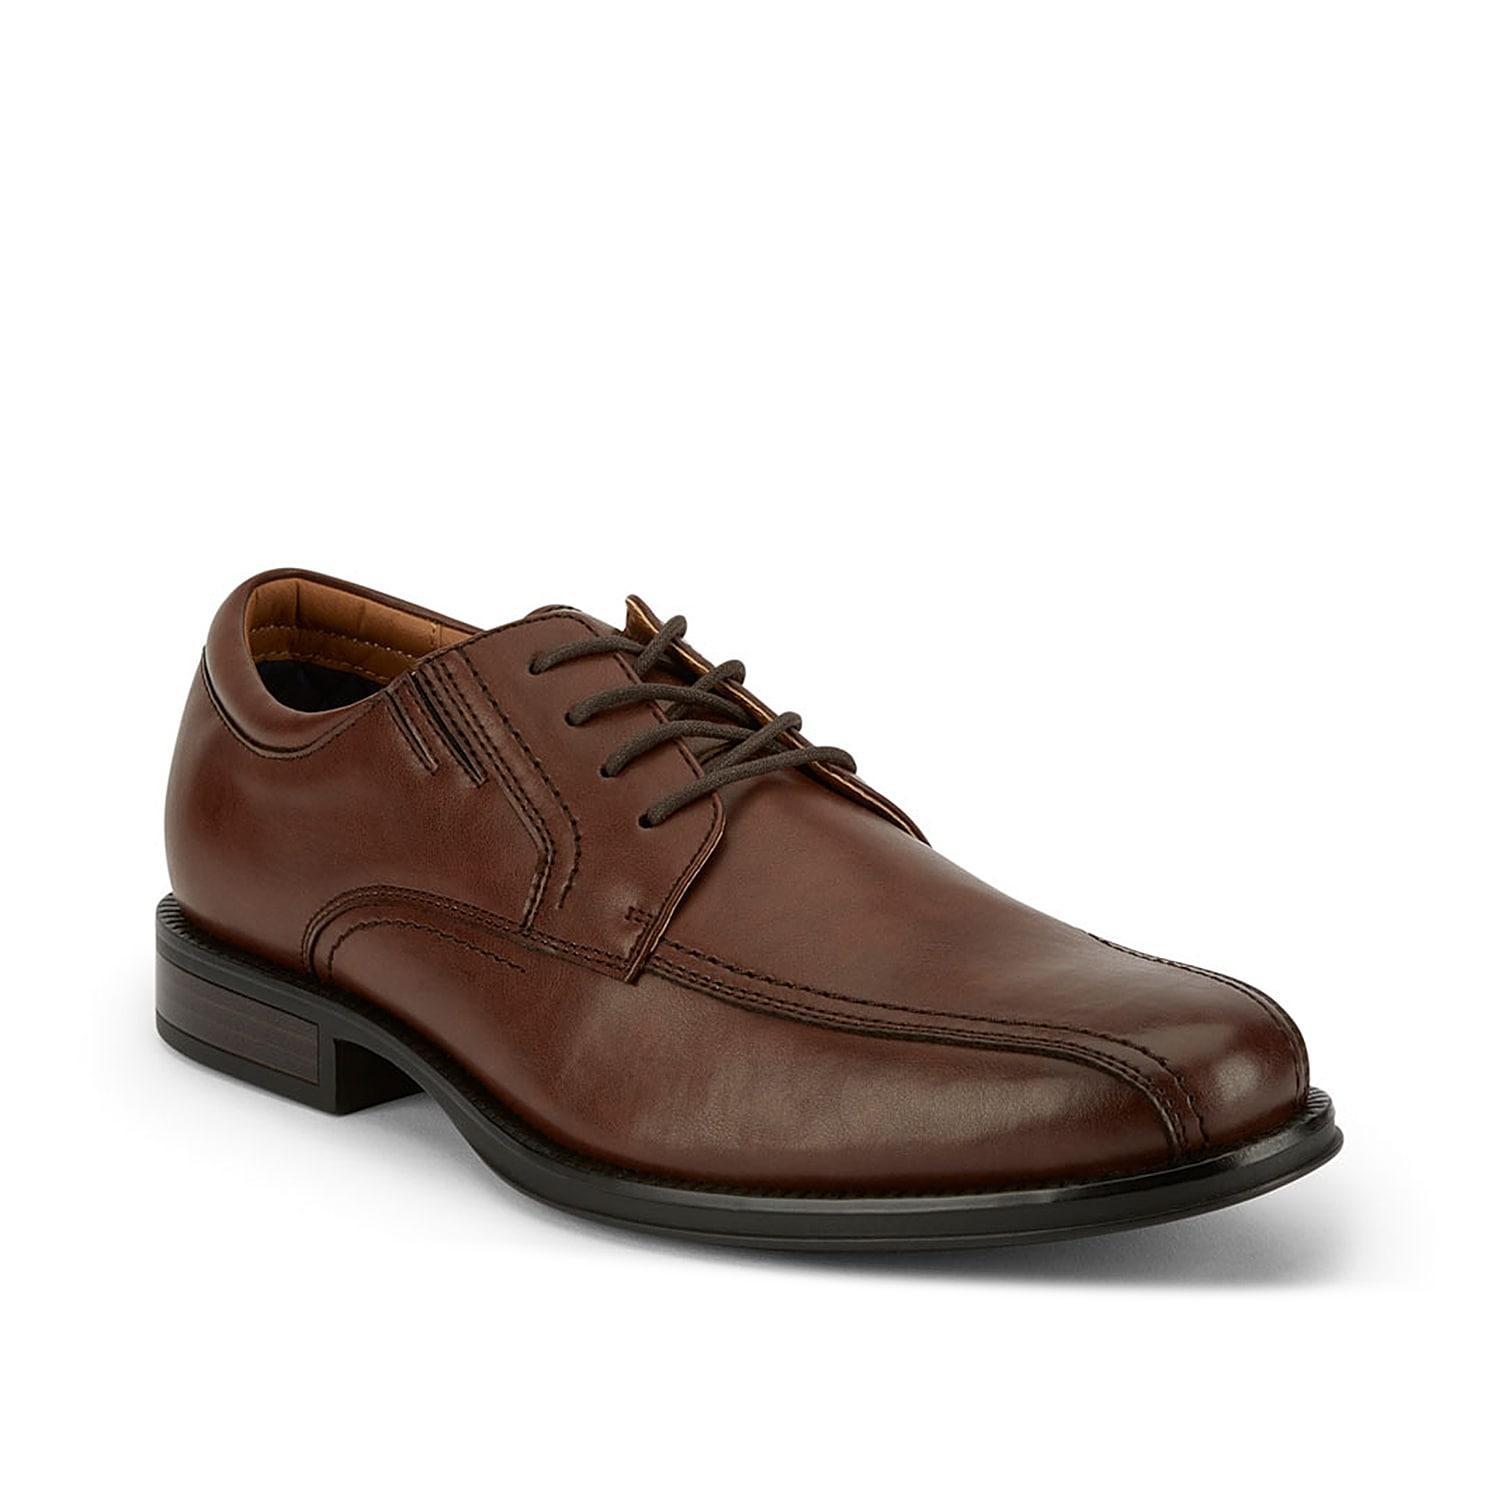 Dockers Mens Geyer Dress Oxford Mens Shoes Product Image